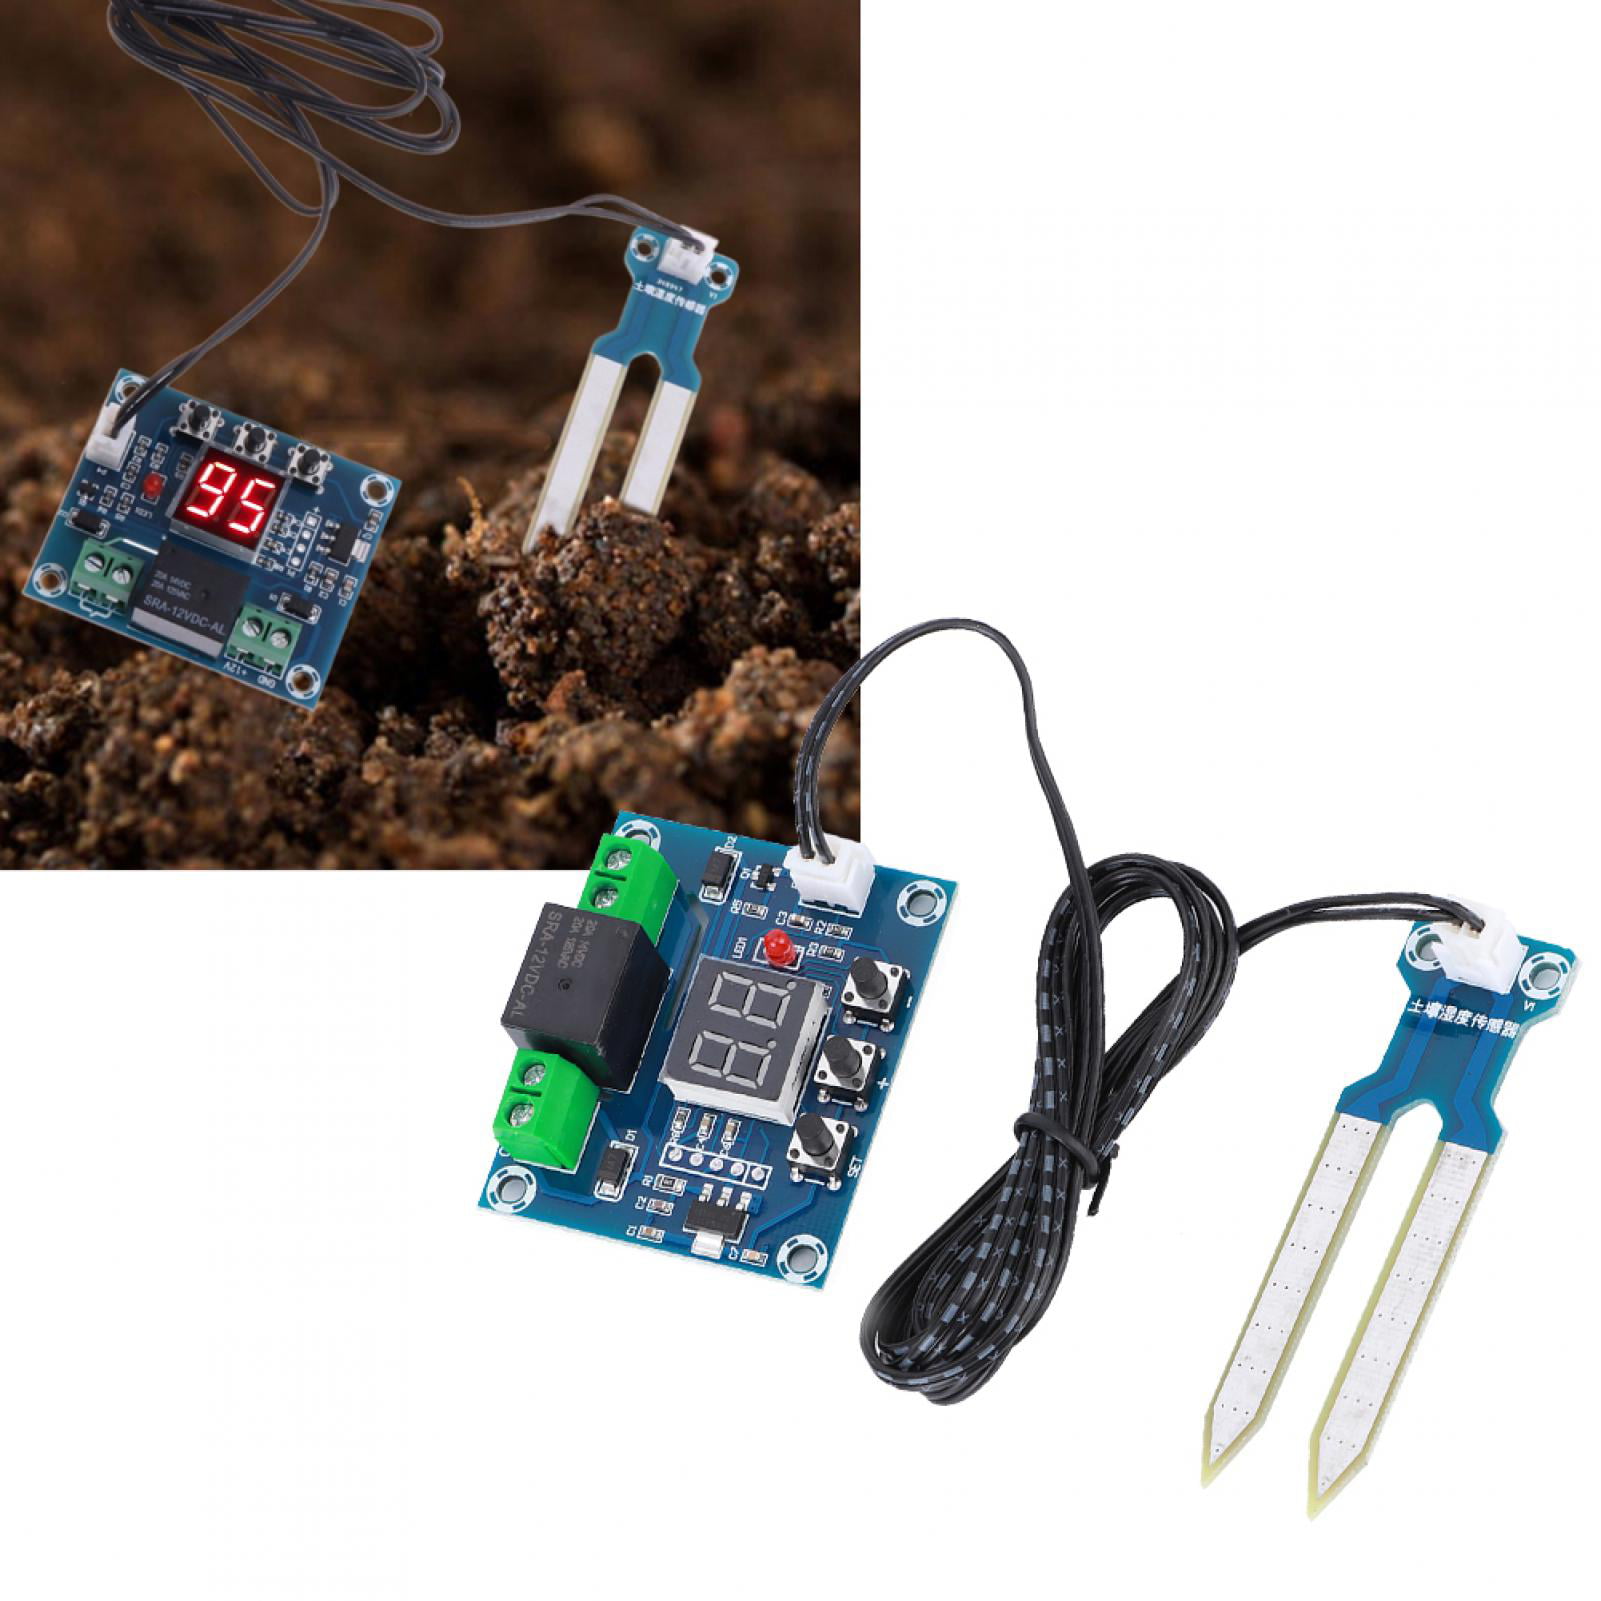 Irrigation Controller System Automatic Watering Module for Garden leidersty 12V Soil Humidity Sensor 